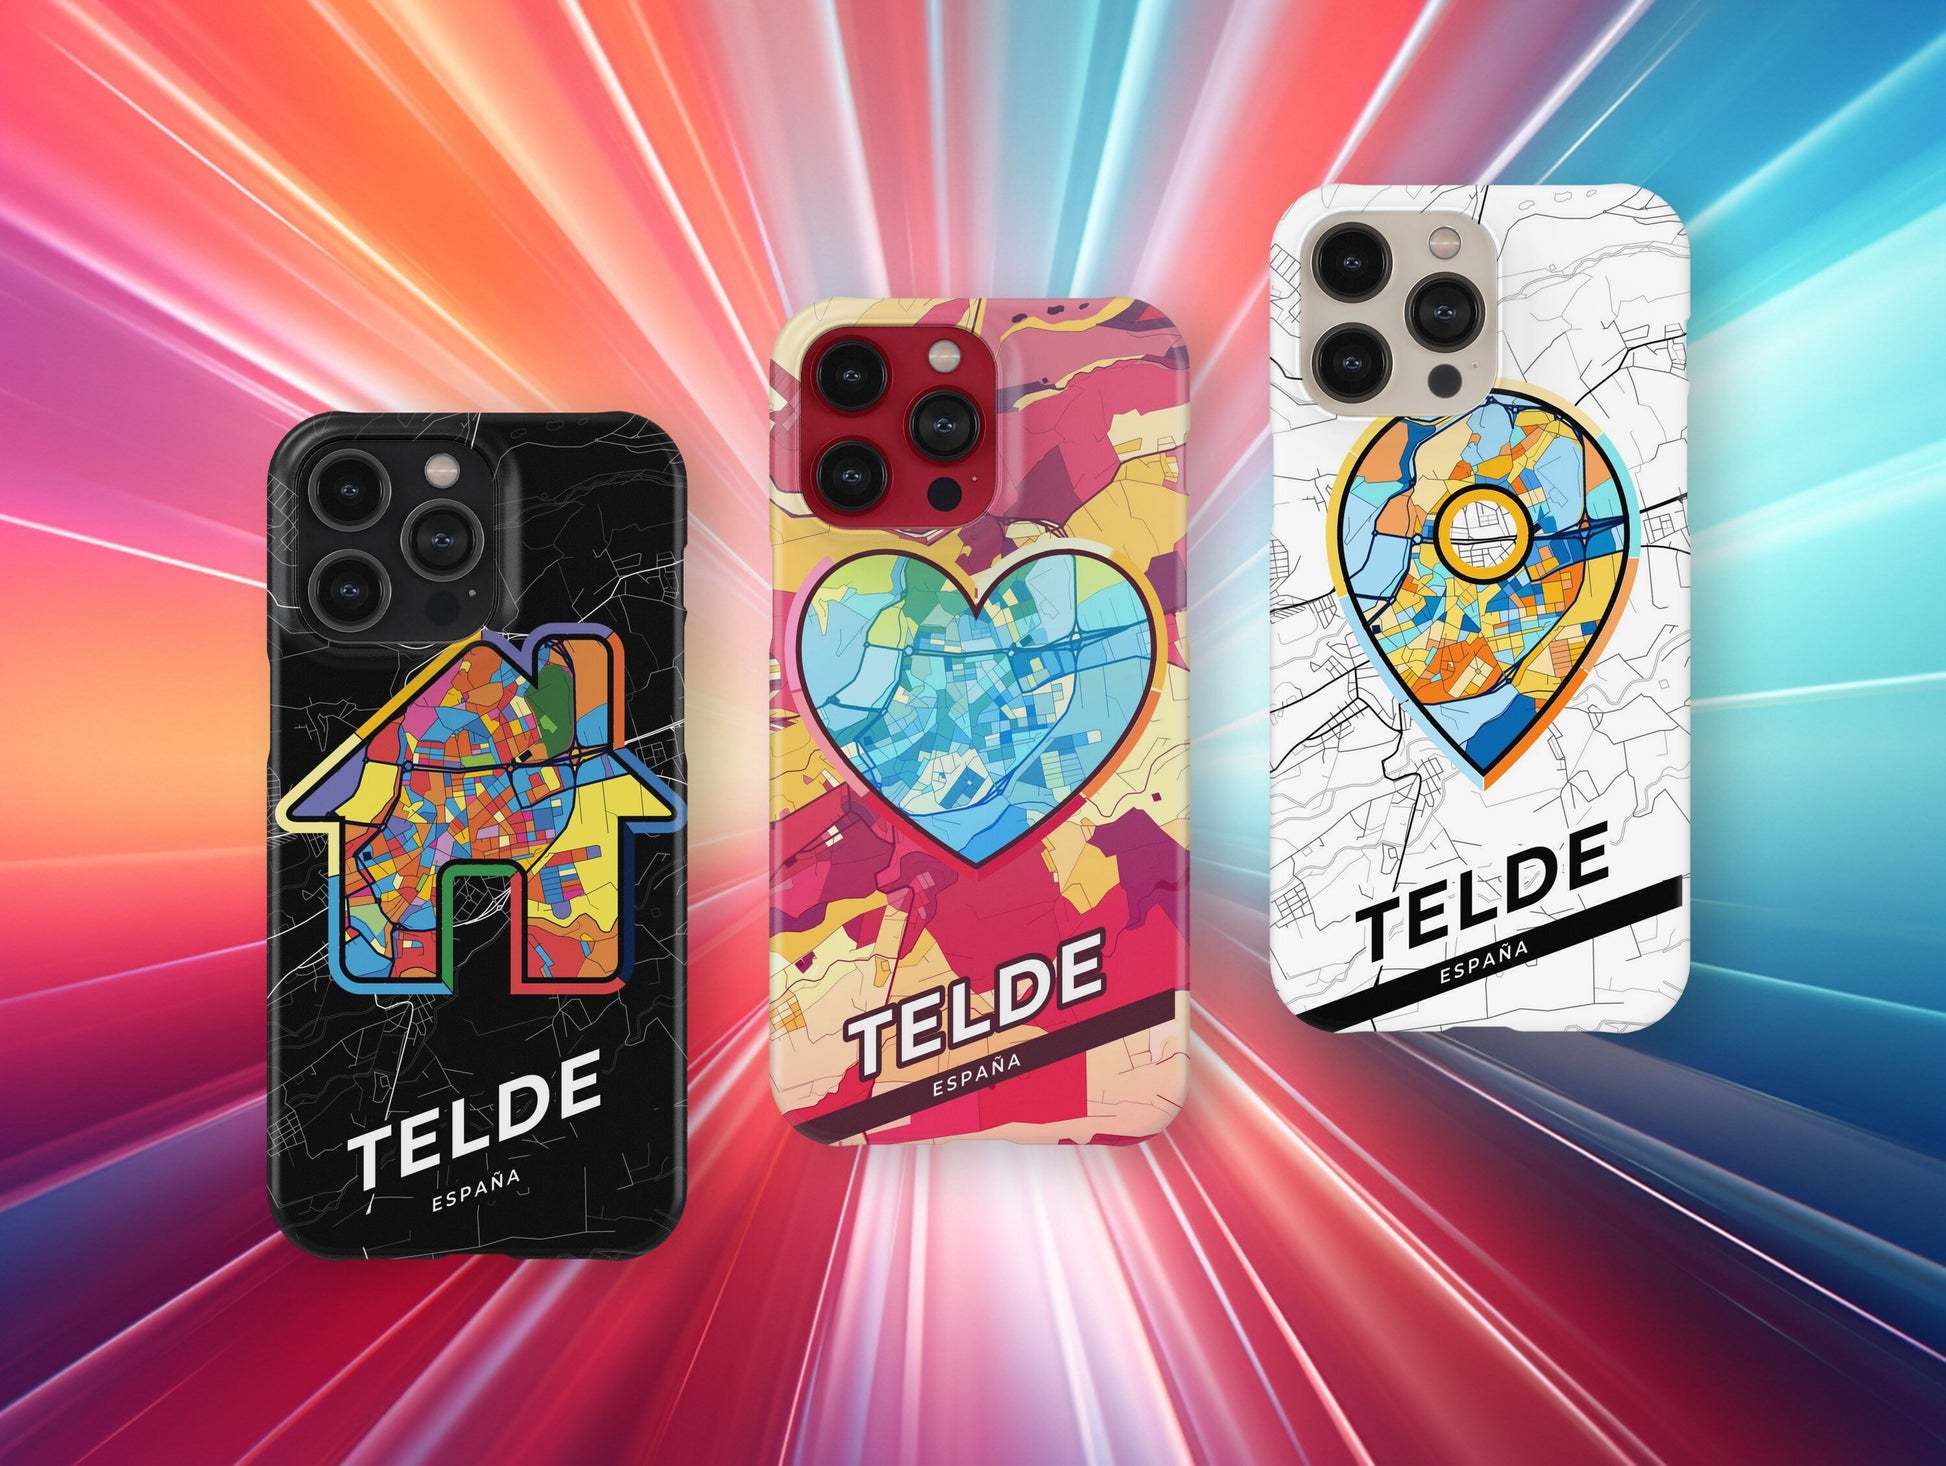 Telde Spain slim phone case with colorful icon